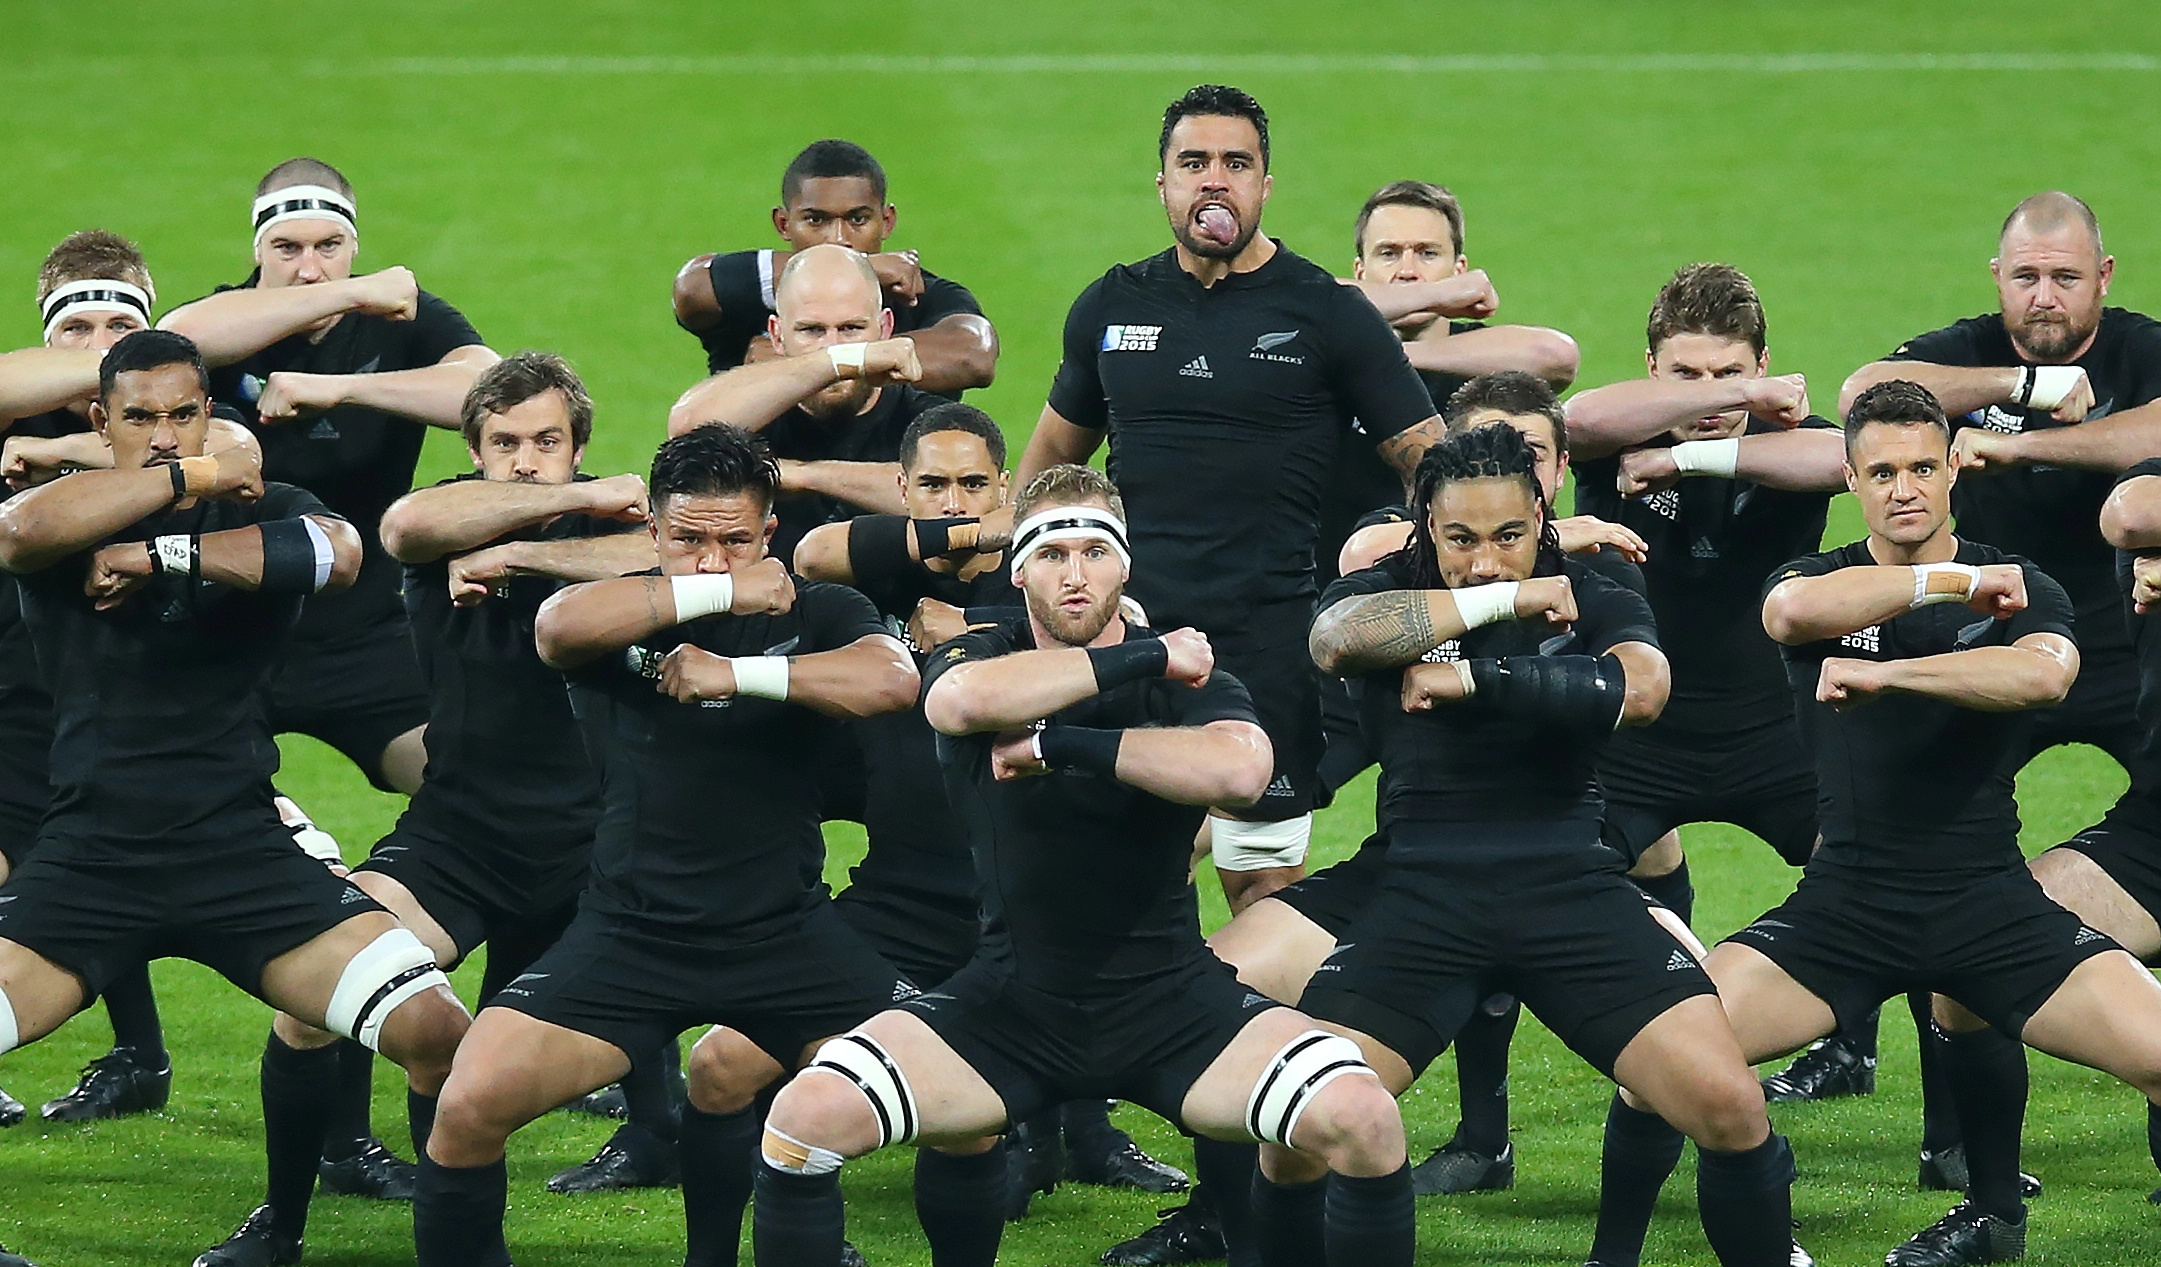 Haka: New Zealand's rugby team, Preparation for a World Cup match, Tradition. 2170x1270 HD Wallpaper.